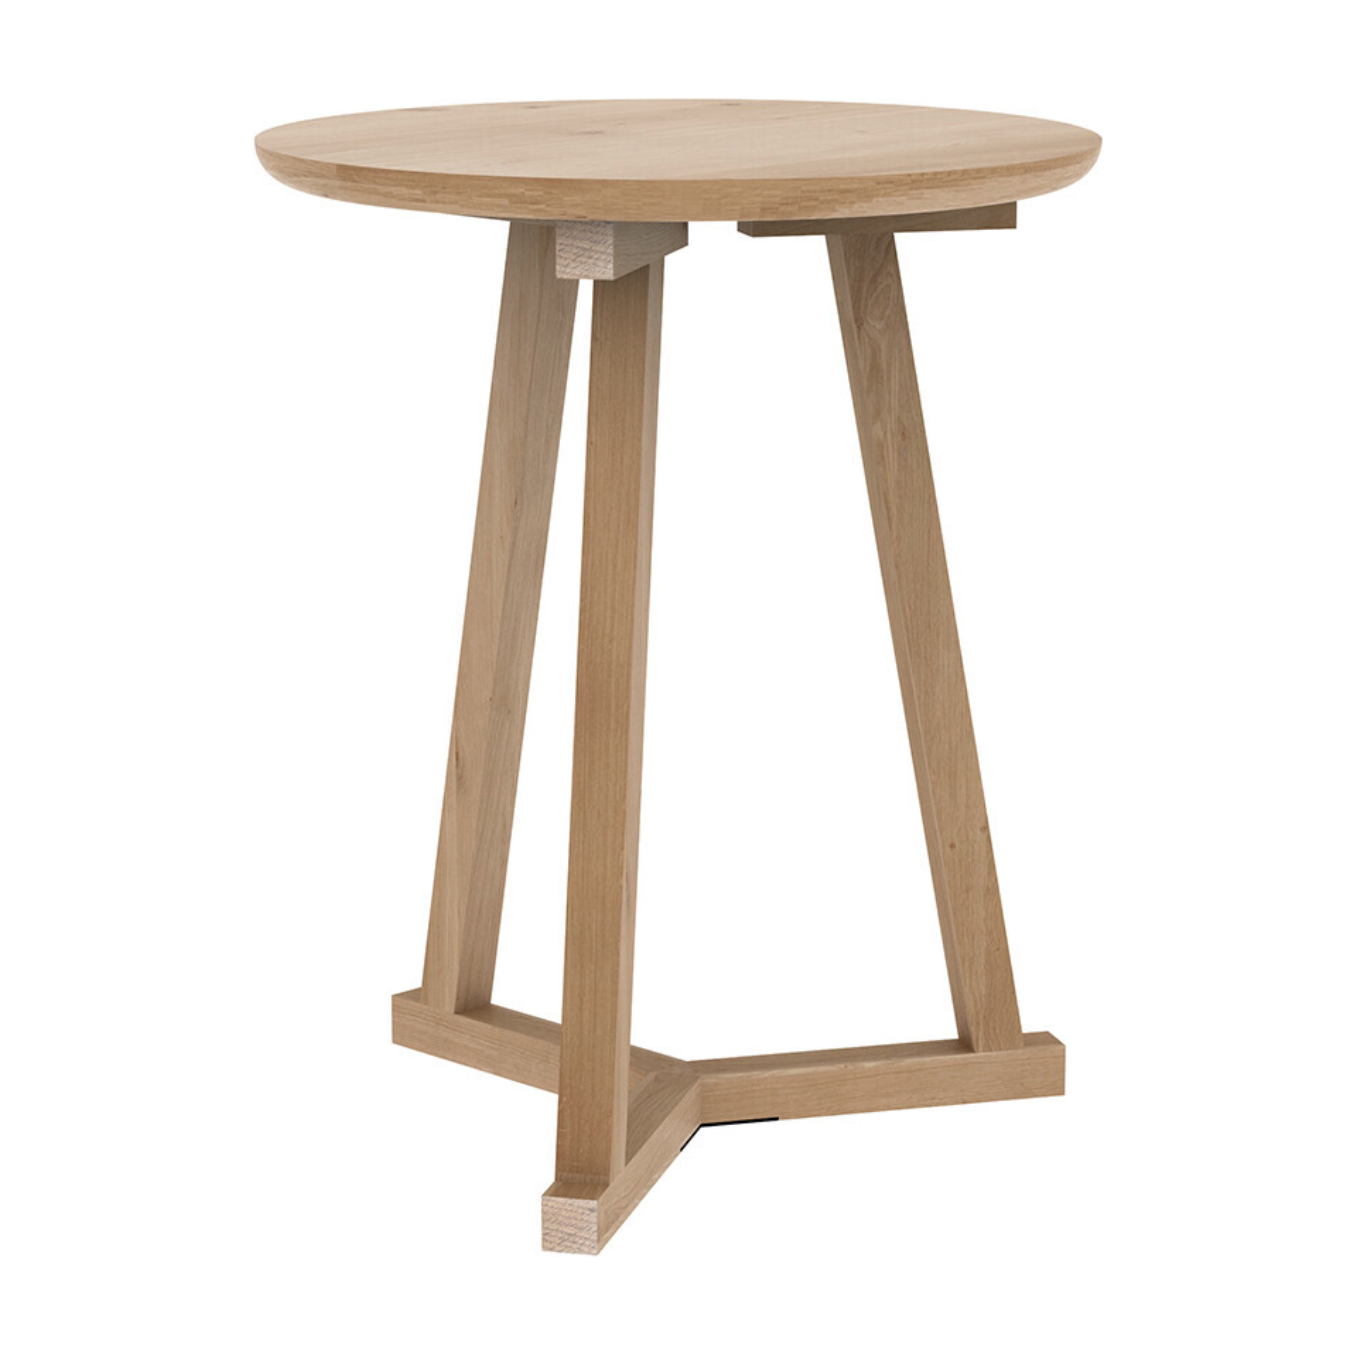 The Oak Tripod Side Table is a light, versatile piece that can be used on its own or in a group of several tables. It can easily be moved from room to room, placed next to a chair or a settee, or as a bedside table.  Dimensions: 18.5"w x 18.5"d x 22.5"h  Weight: 11 lbs  Material: Oak, 100% solid wood Finish: Varnished